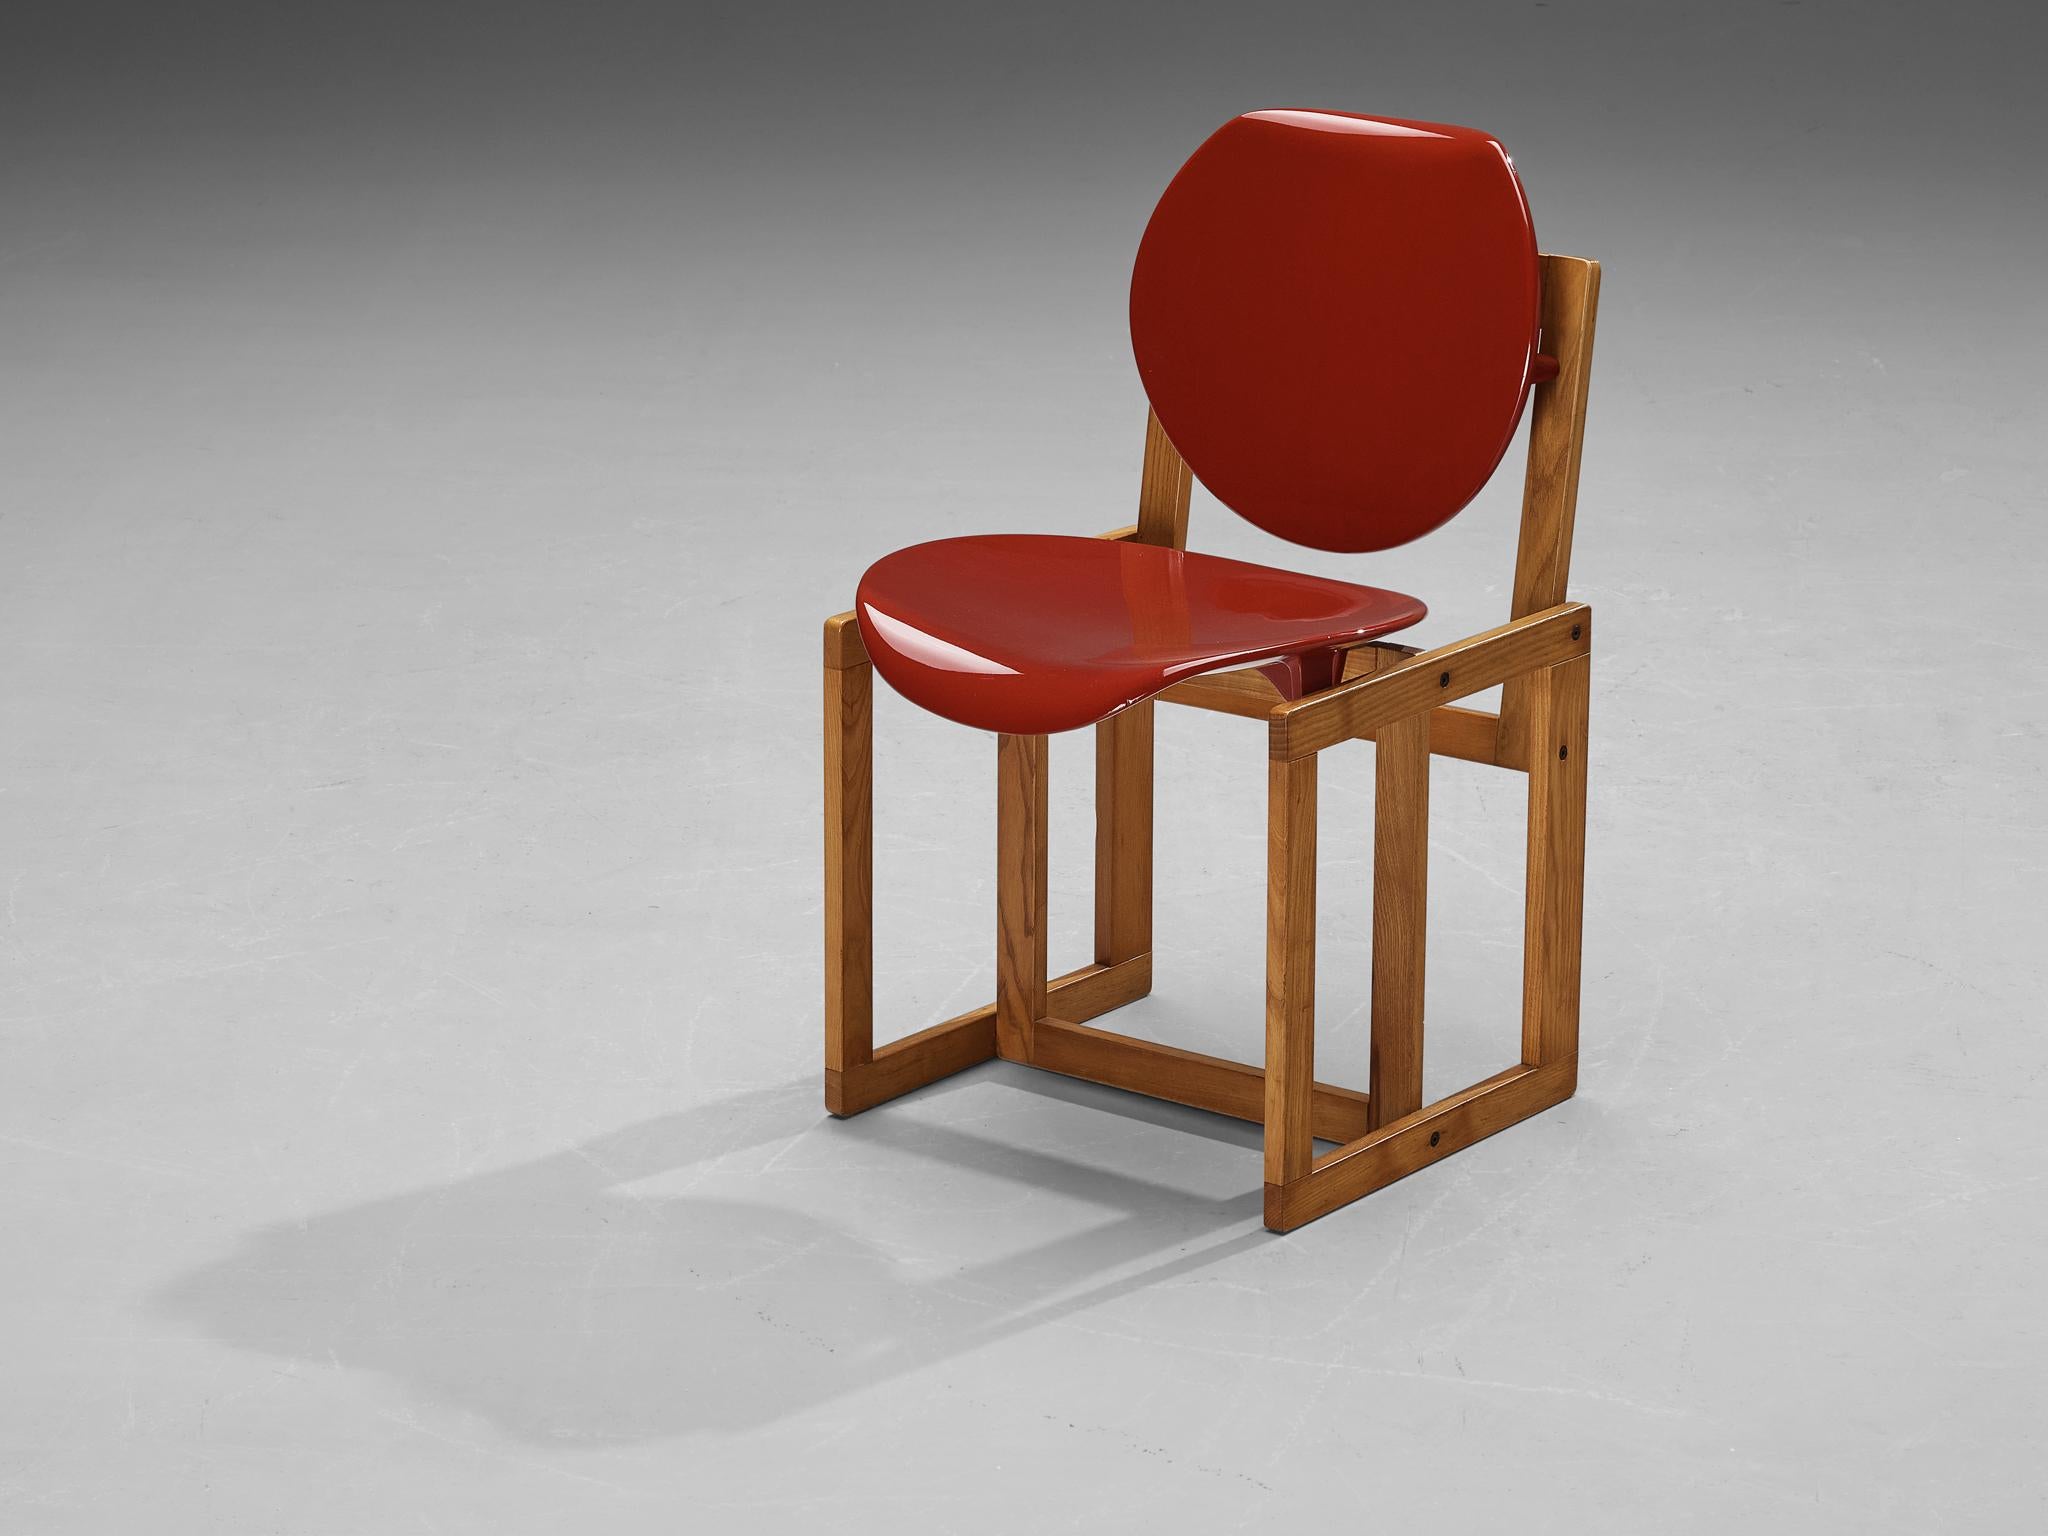 Giuseppe Davanzo for Appiani Selezione, dining chair 'Serena', ash, plastic, Italy, 1960s

This dining chair was designed by Giuseppe Davanzo in the 1960s. On an ash frame rest the round seat and backrest. The frame shows a warm tone of the ash wood